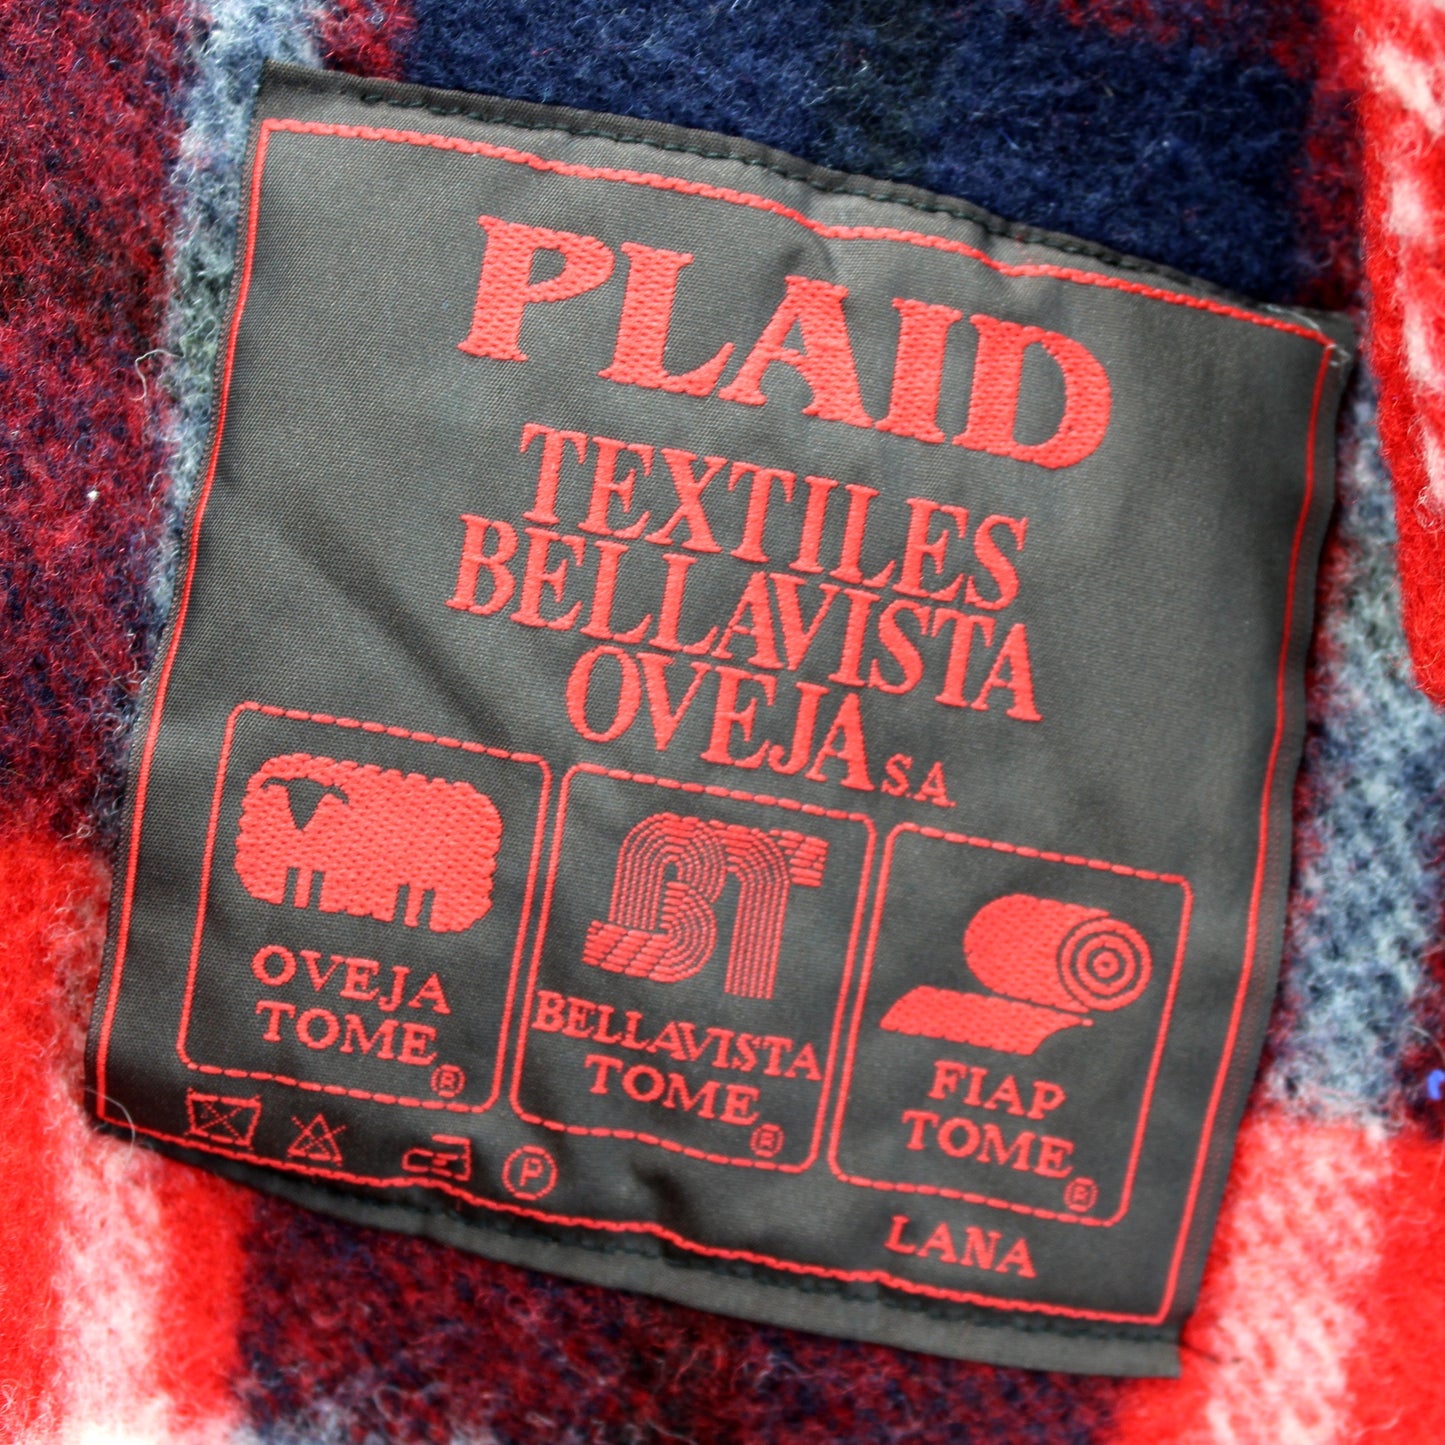 Bellavista Oveja Wool Throw Blanket Red White Blue Black Plaid 56" X 65" 2 Available  lana dry clean